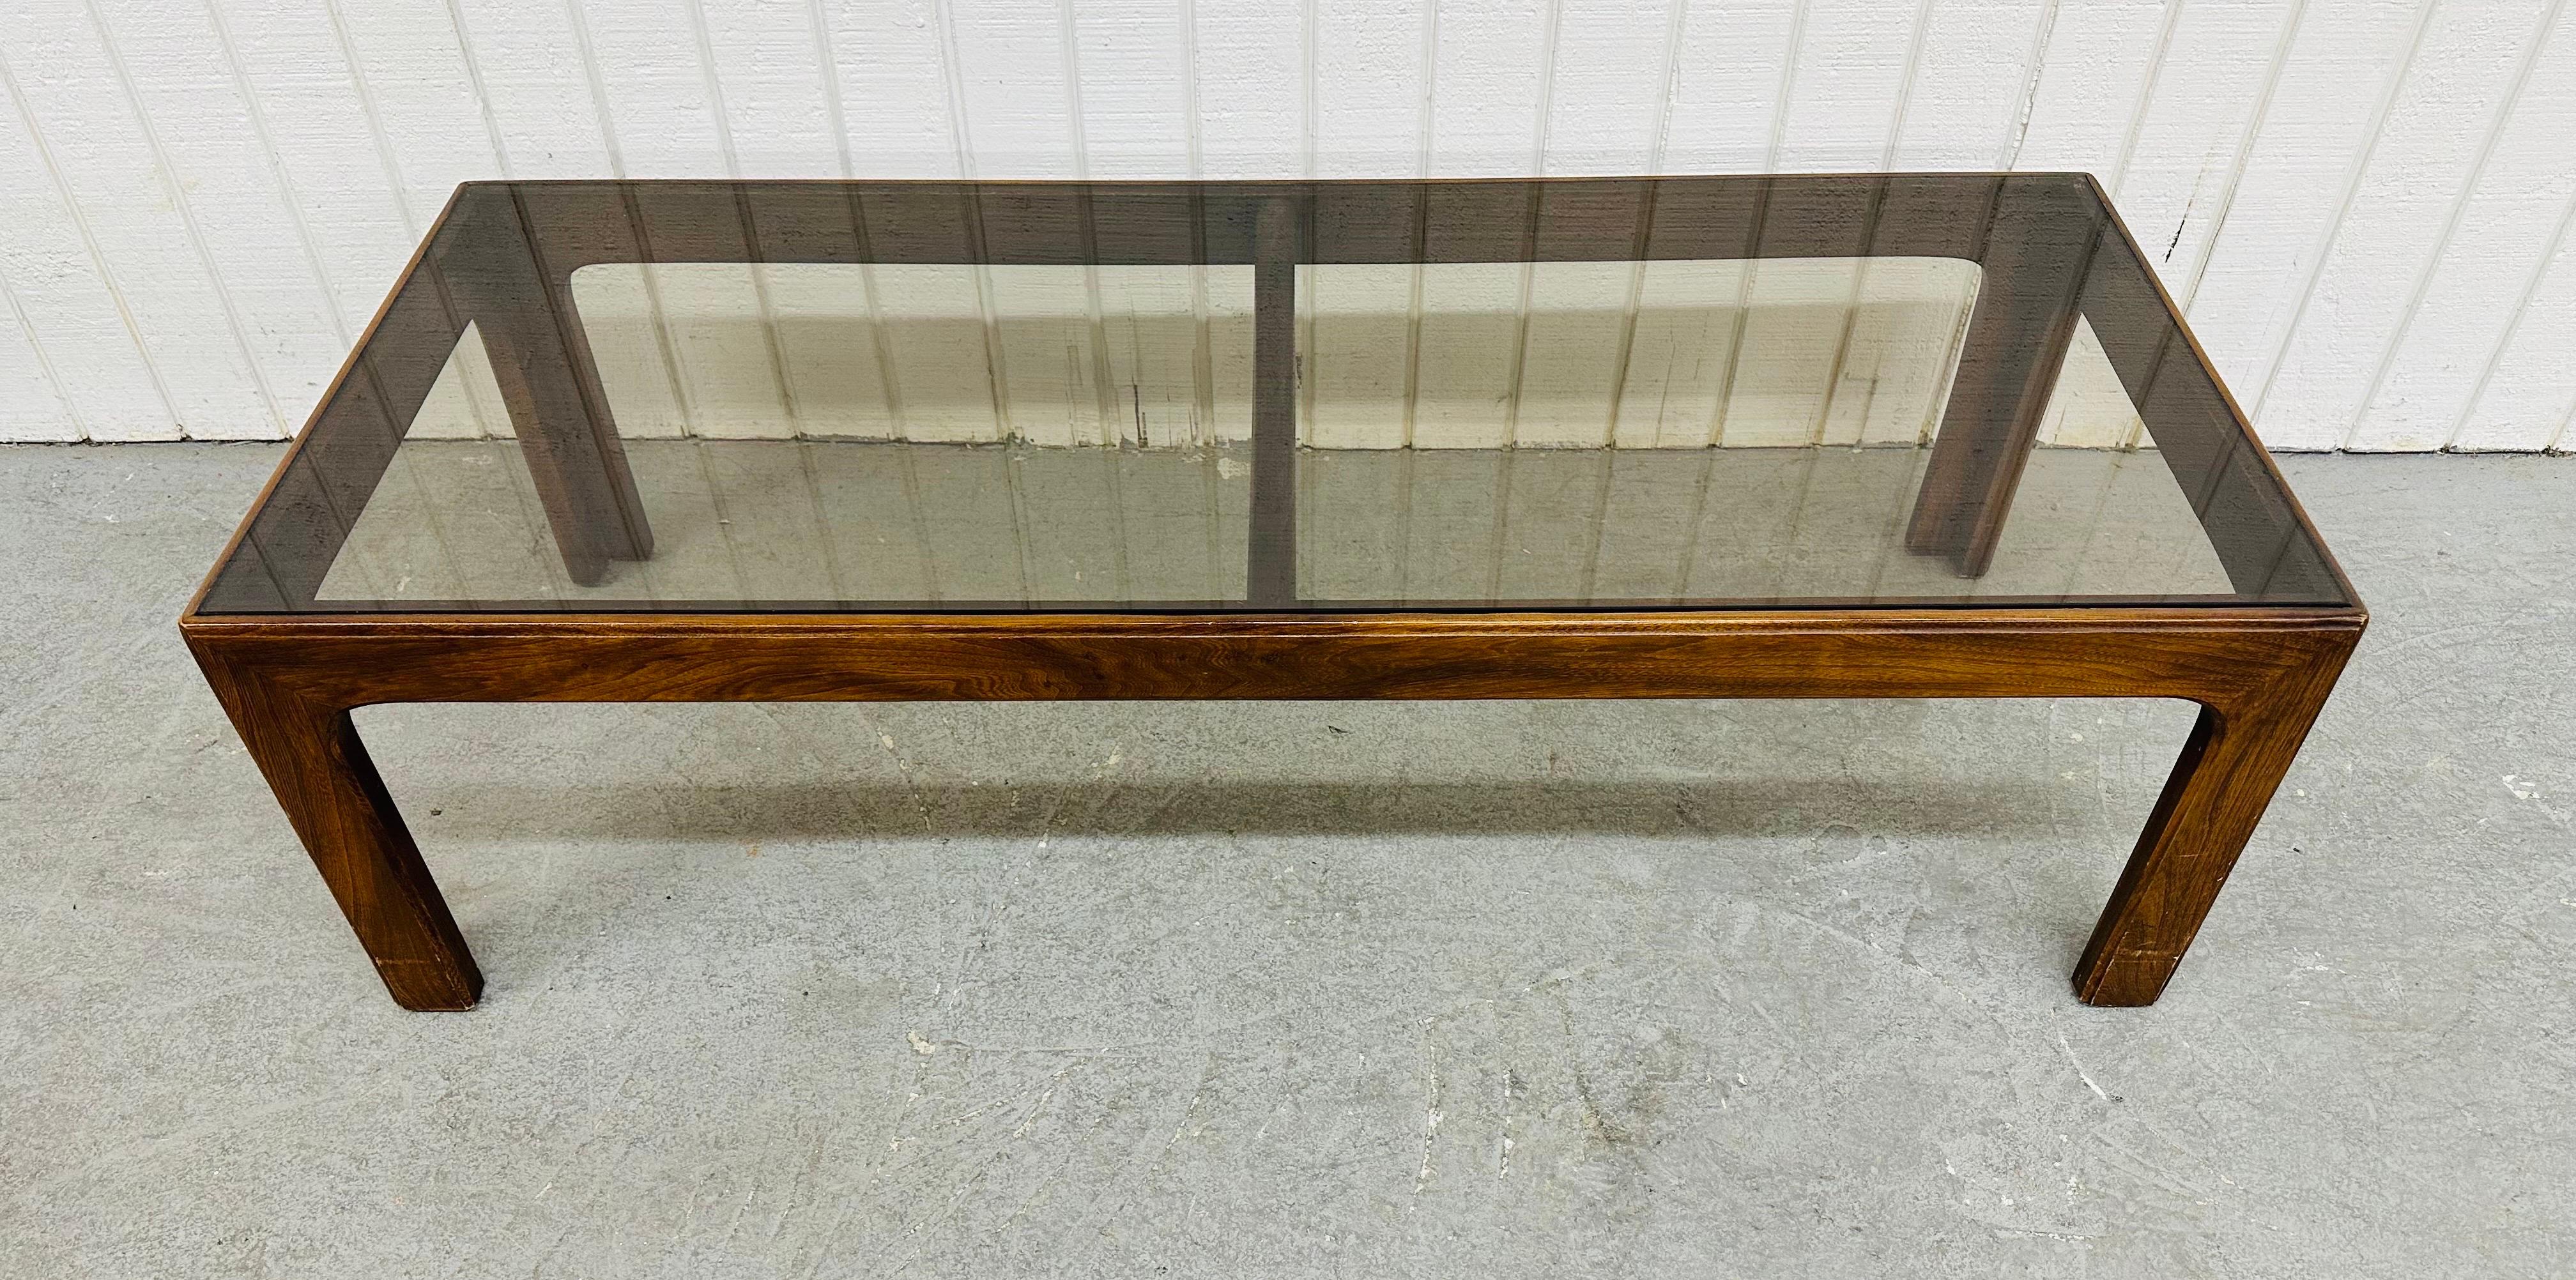 This listing is for a Mid-Century Modern Lane Style Smoked Glass Coffee Table. Featuring a straight line design, rectangular smoked glass top, walnut base with four attached legs, and a beautiful walnut finish. This is an exceptional combination of